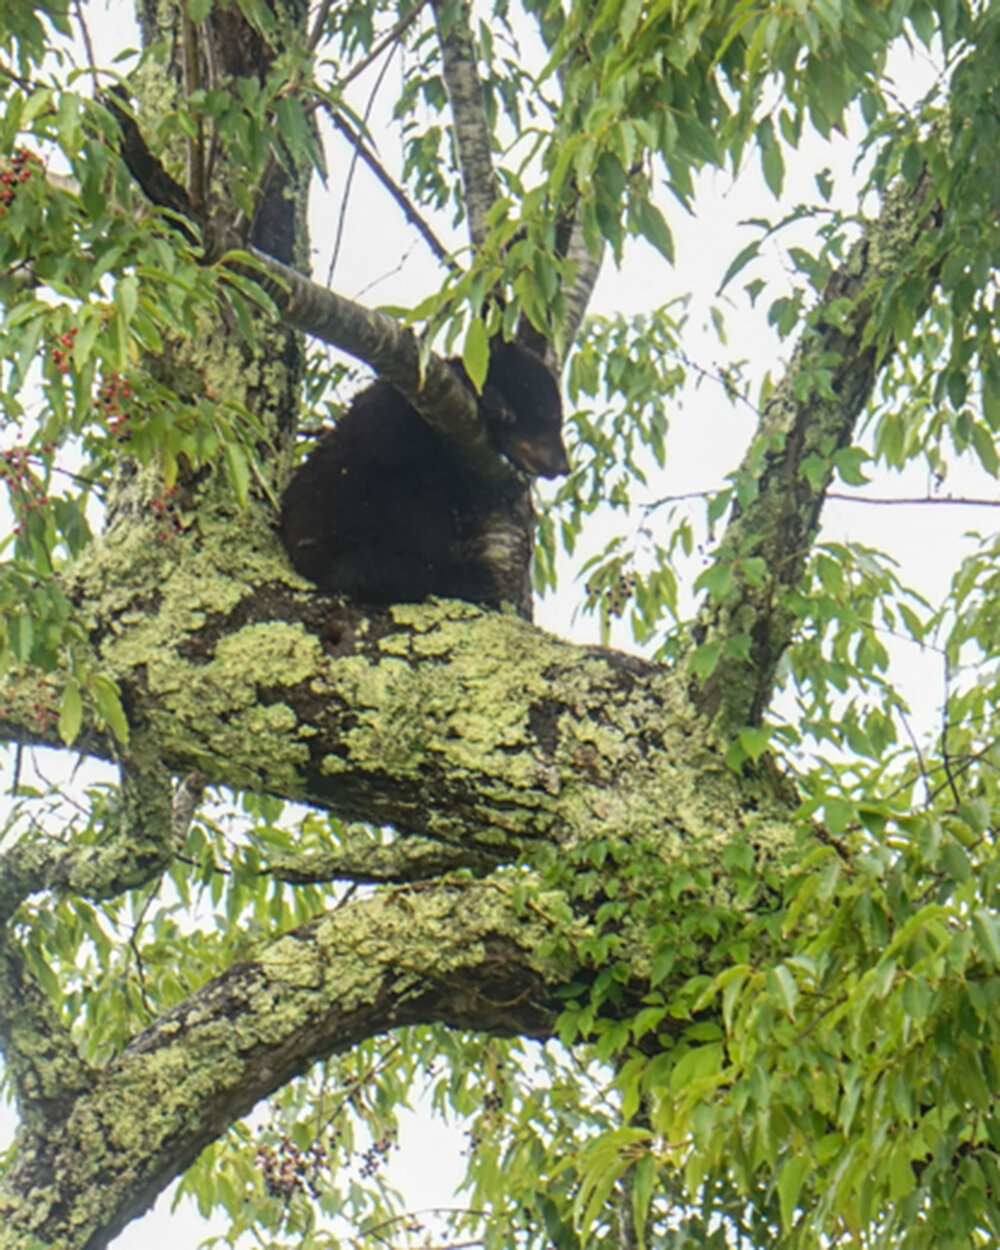 Sleeping bear cub up in a tree in cades cove.